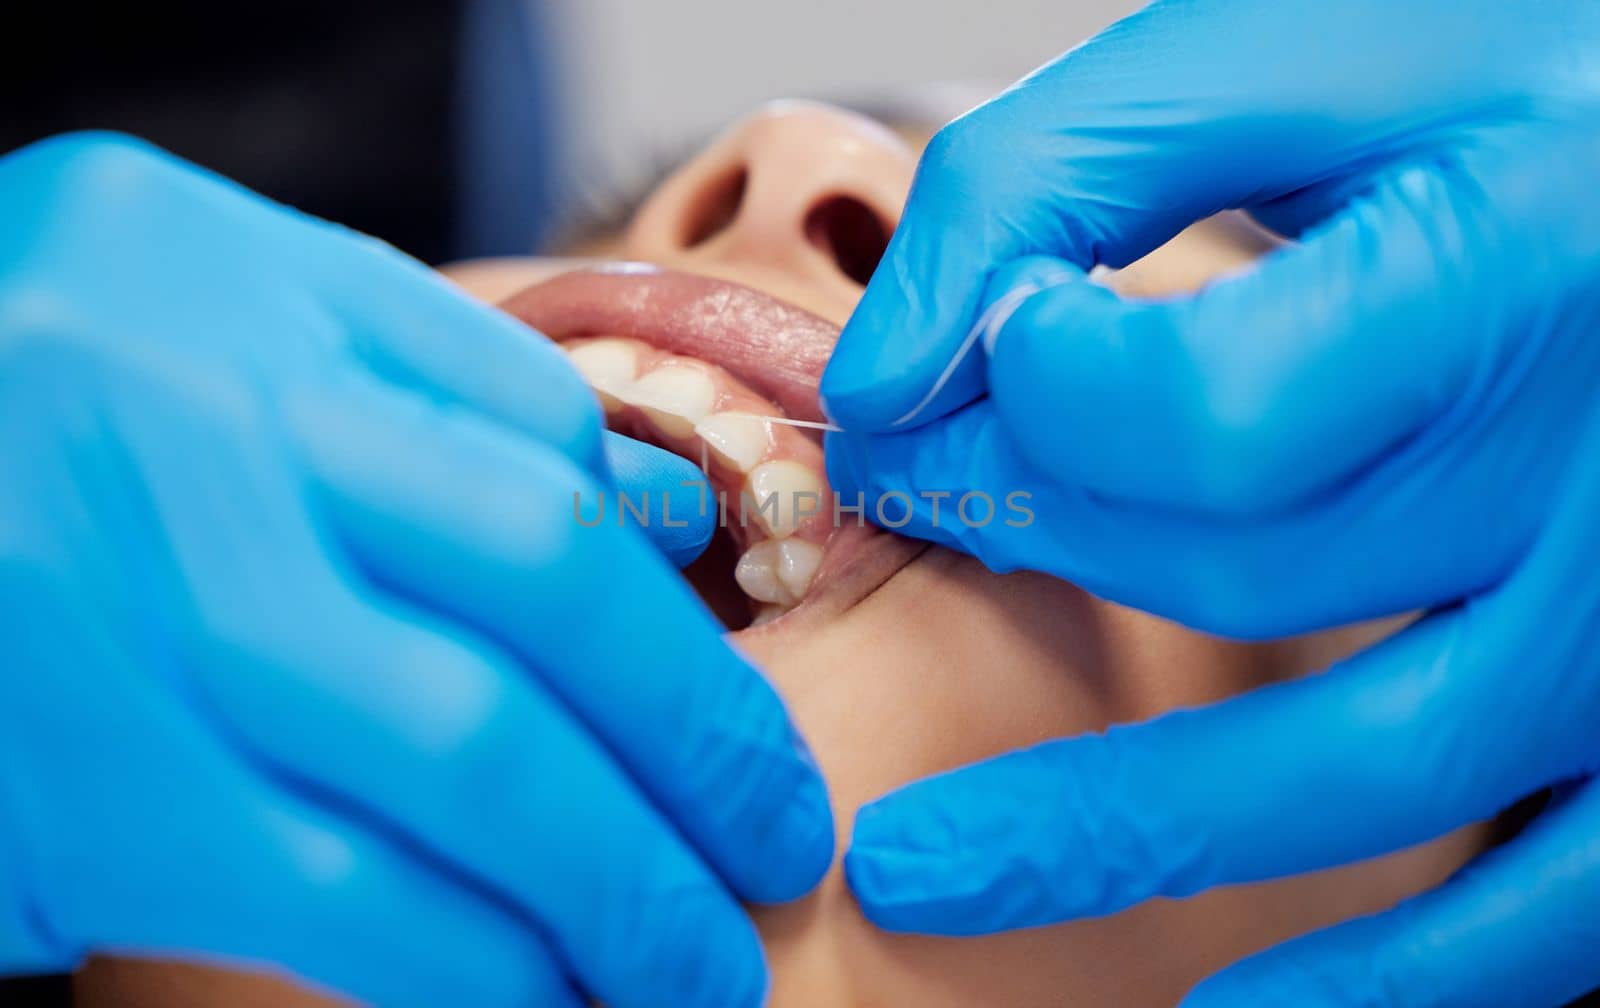 No space goes un-missed. a young woman having a dental procedure performed on her